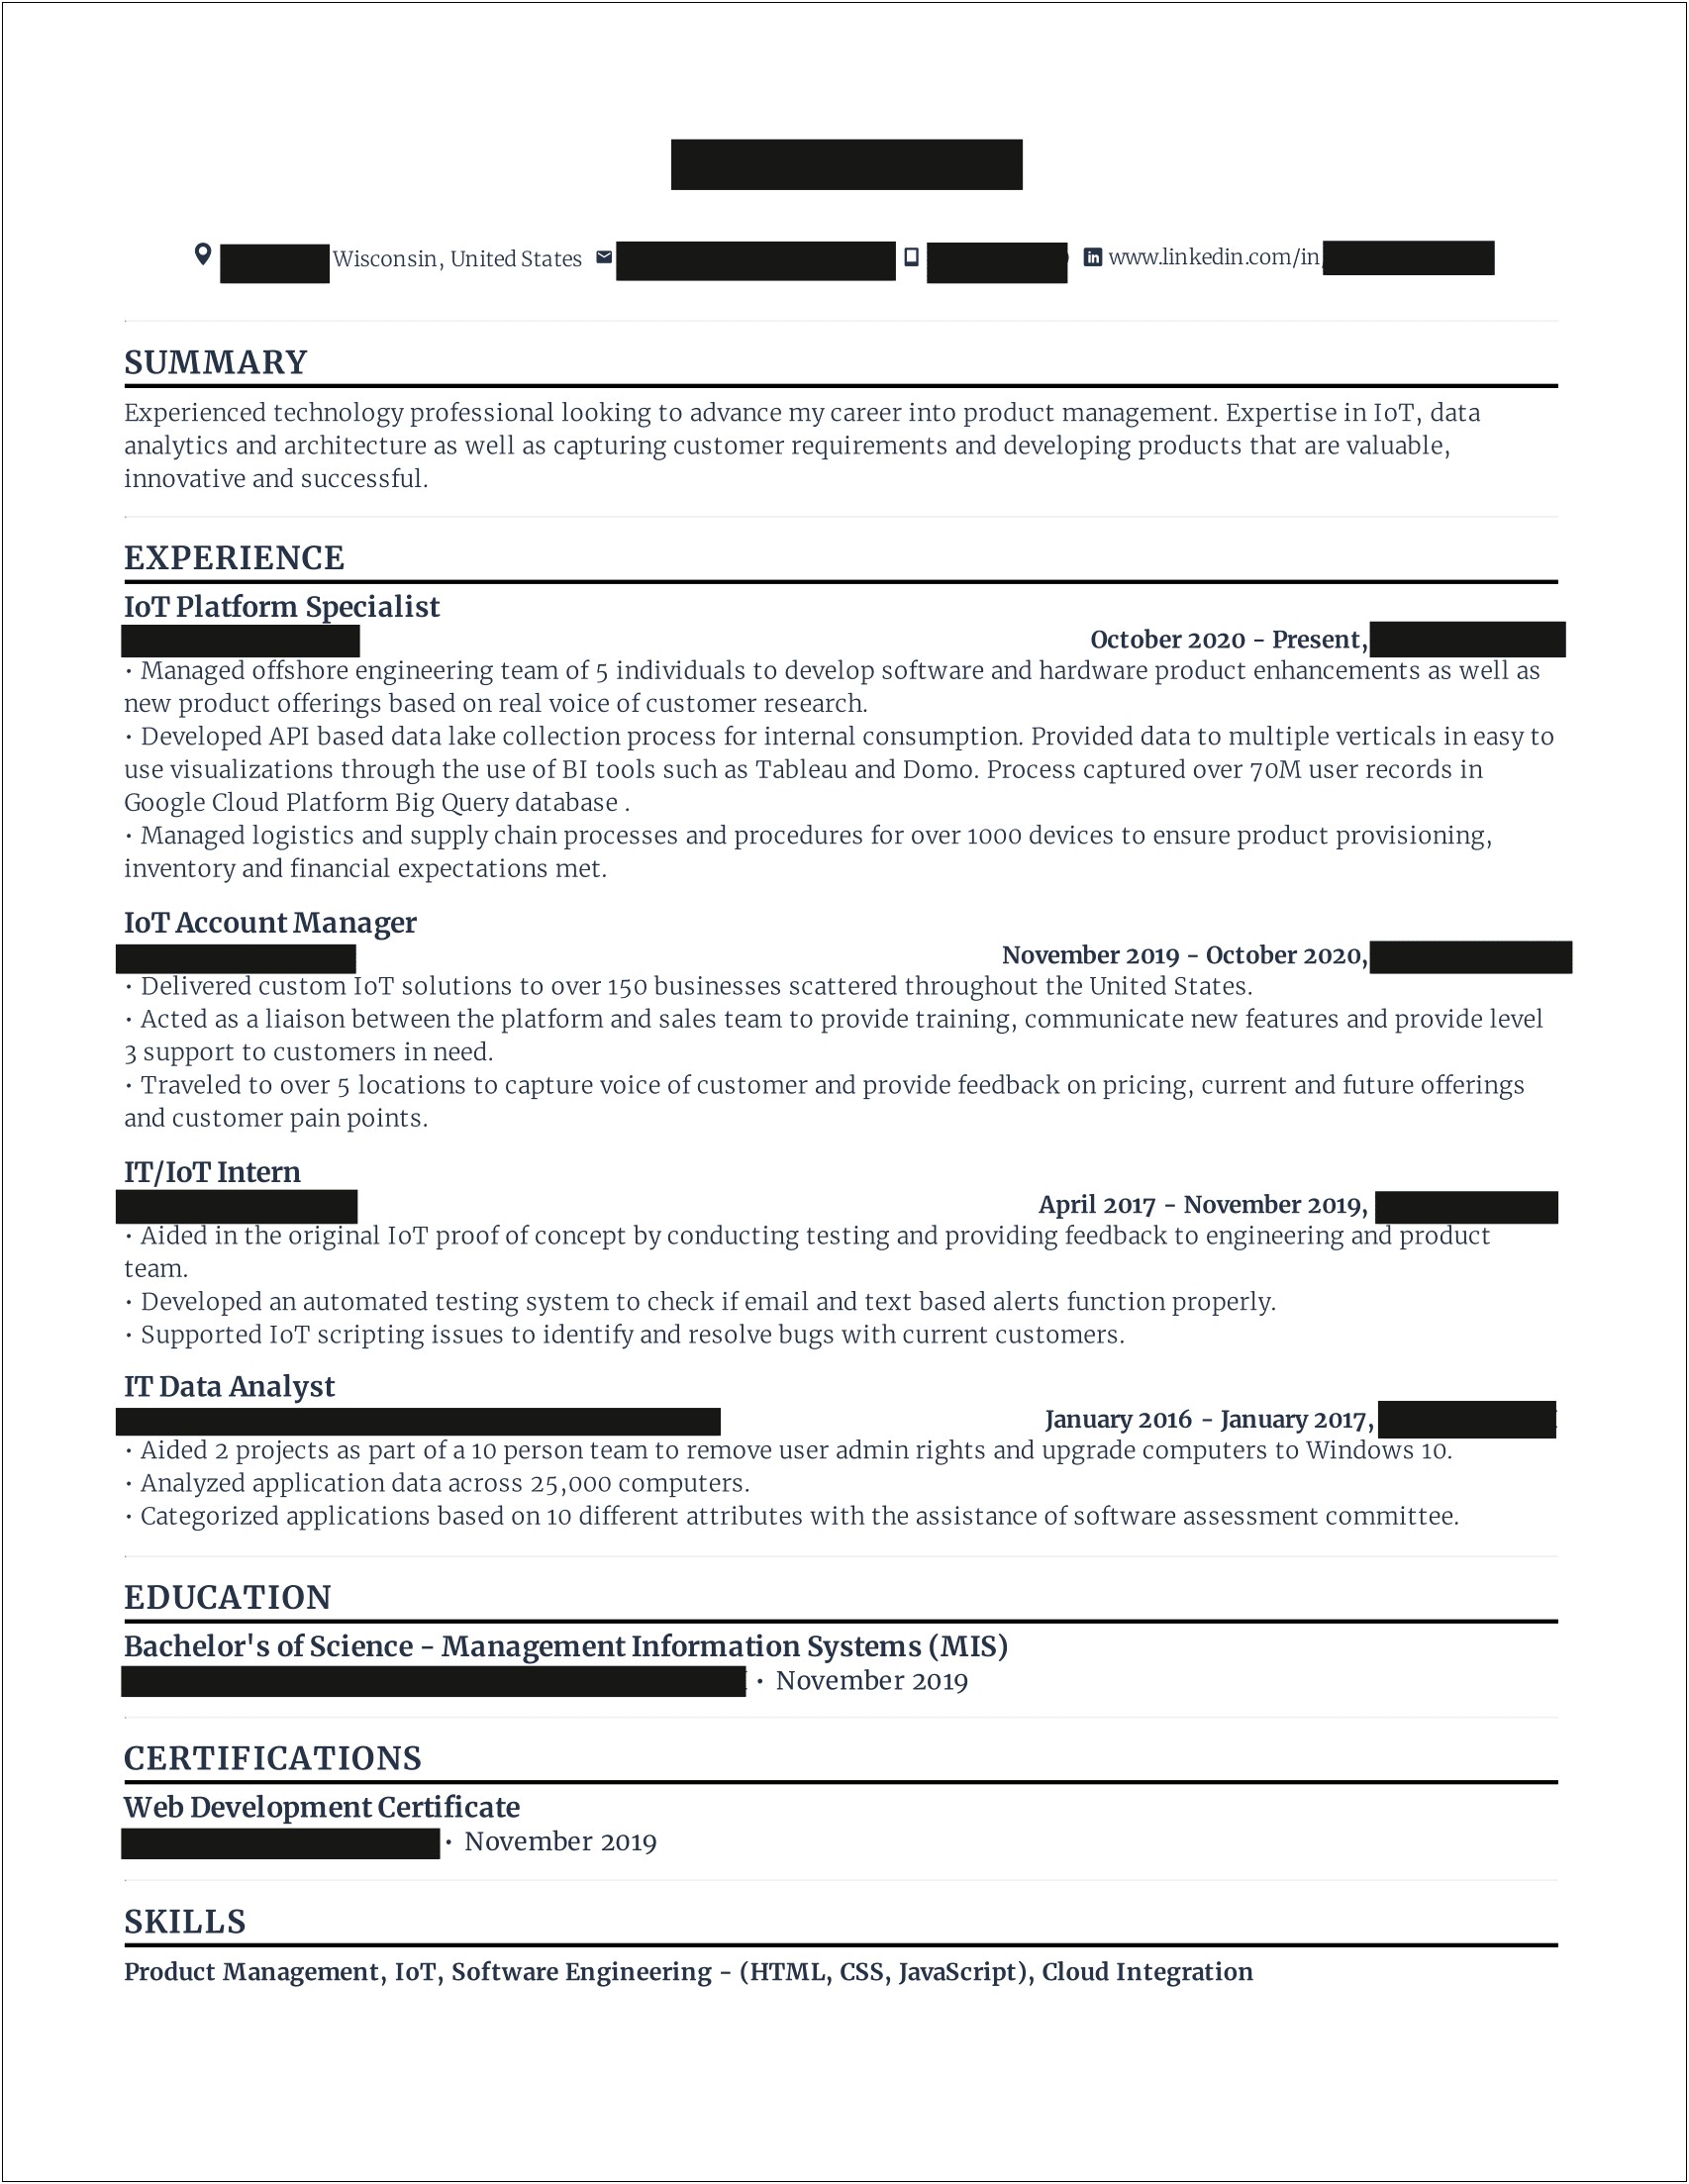 Where To Find Good Product Manager Resume Sample